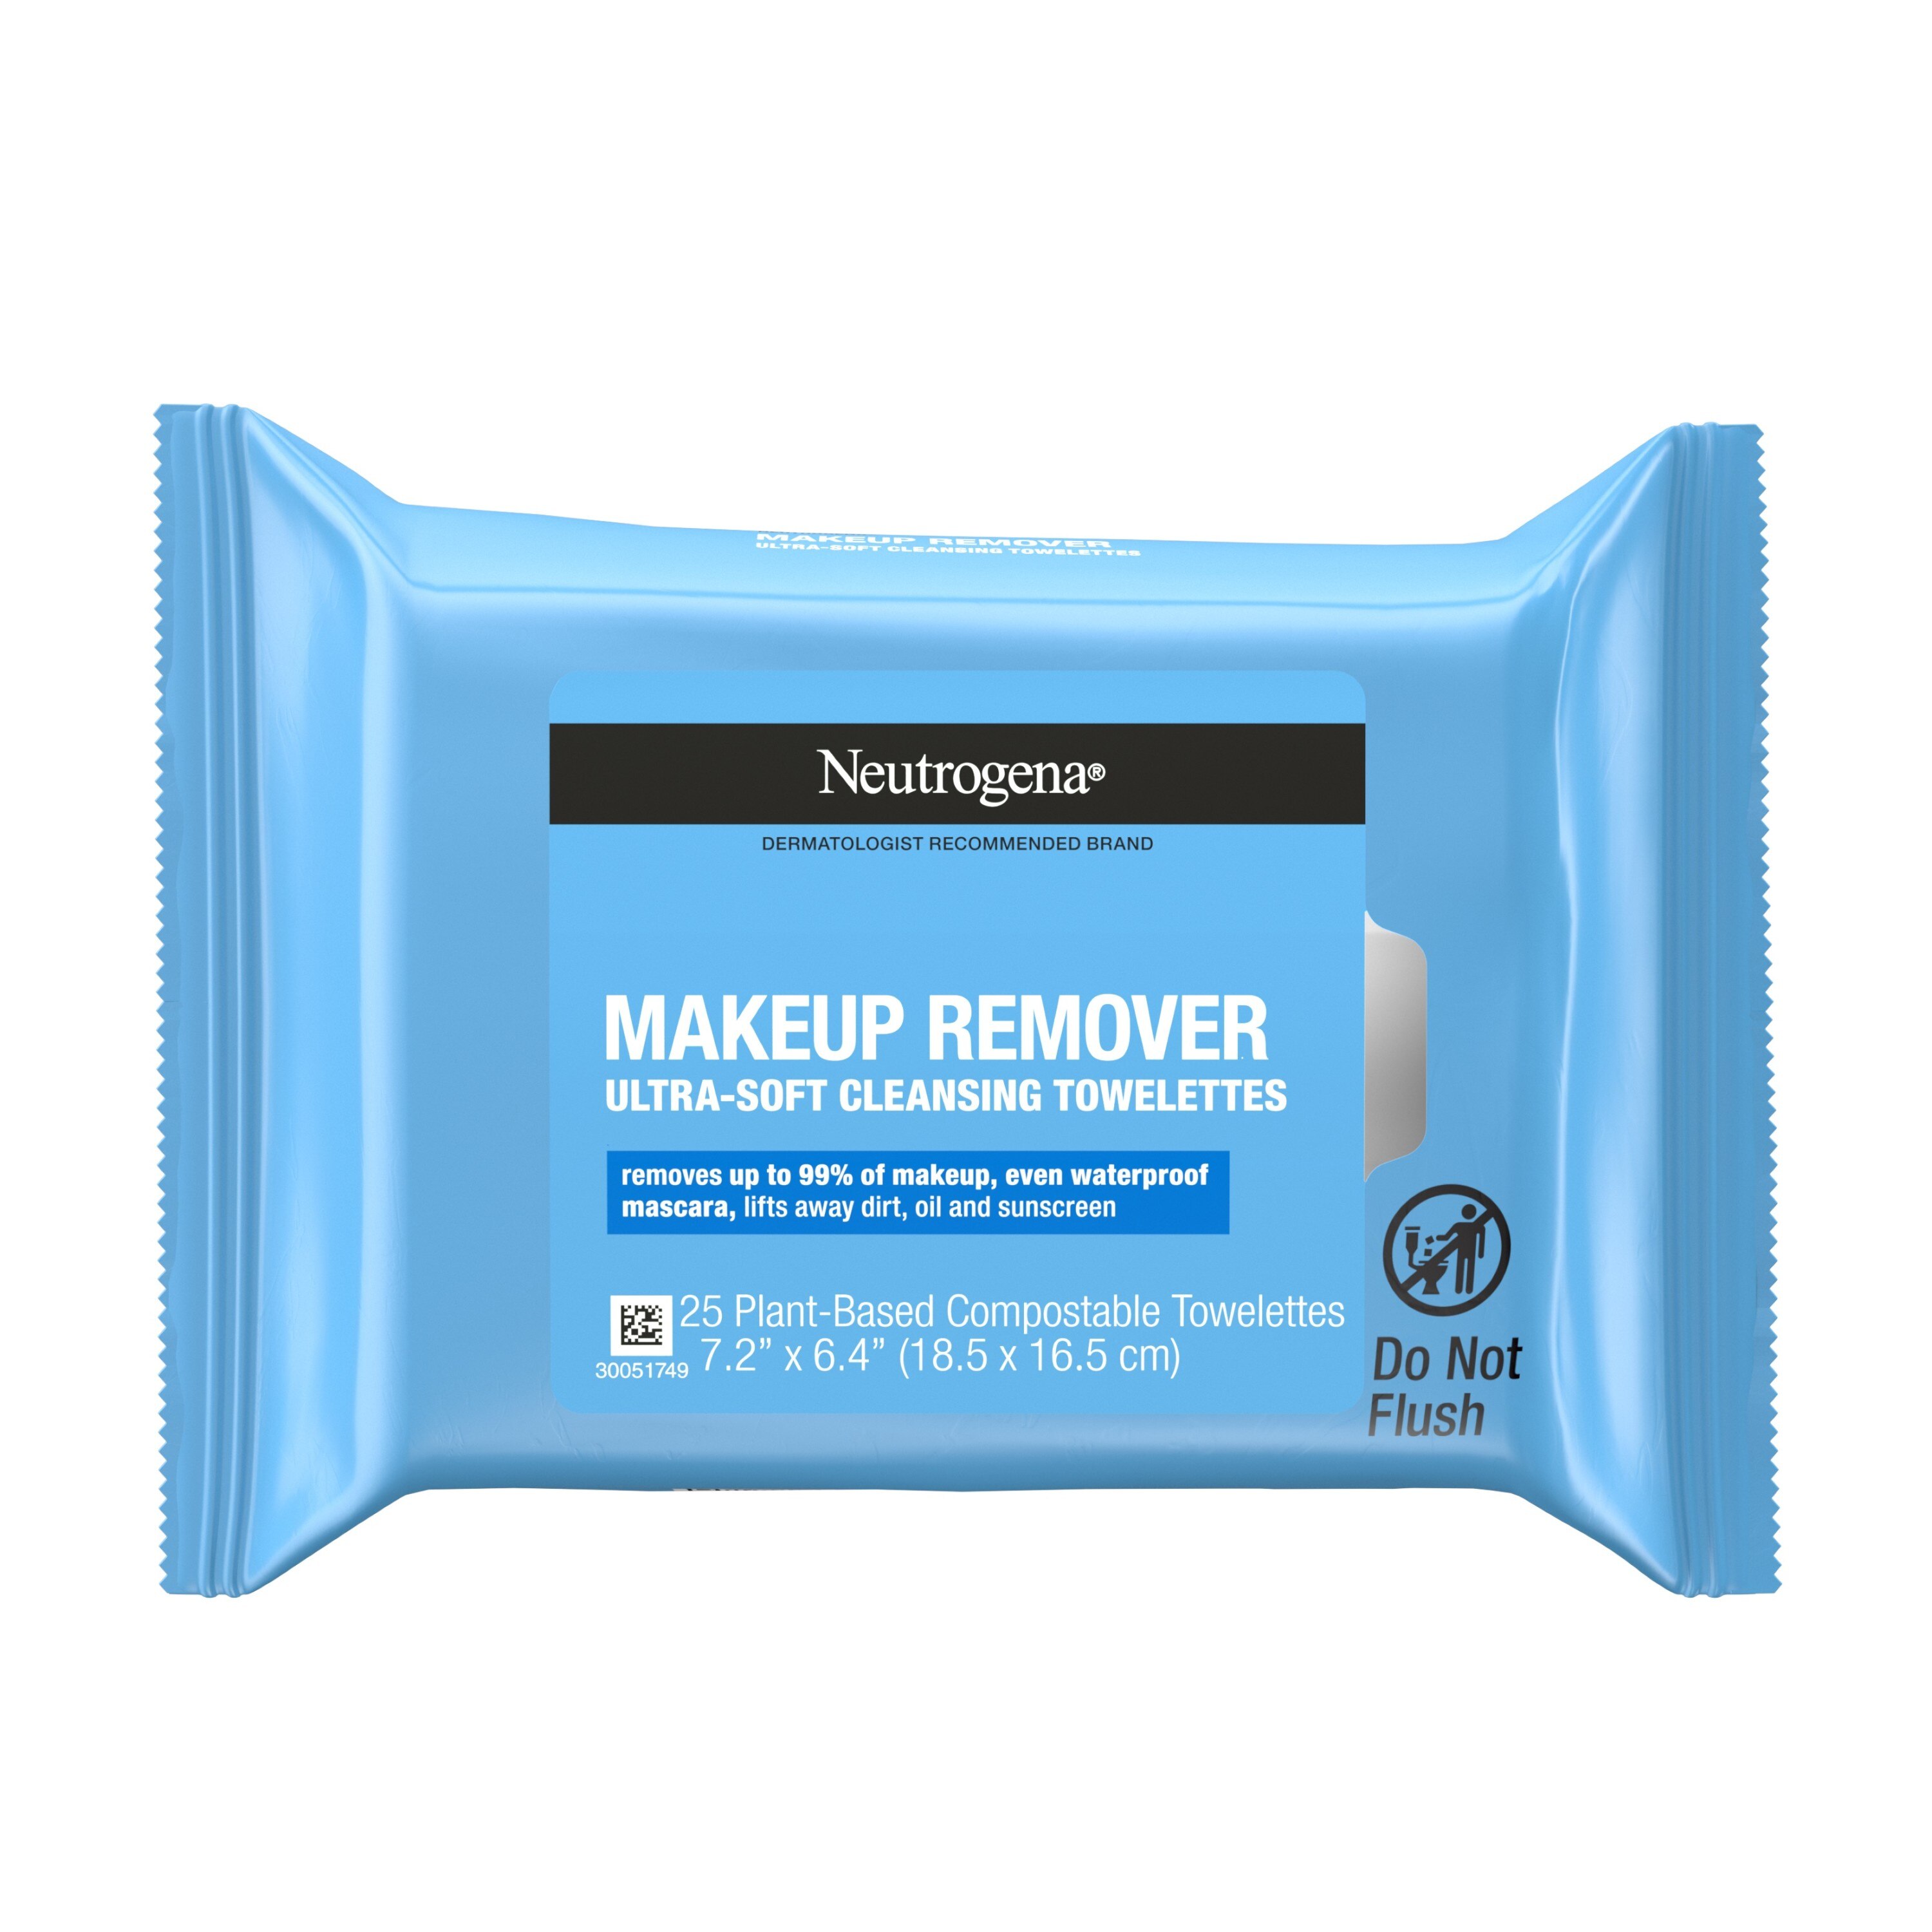 Neutrogena Makeup Remover Cleansing Towelettes Refill Pack, 25/Pack